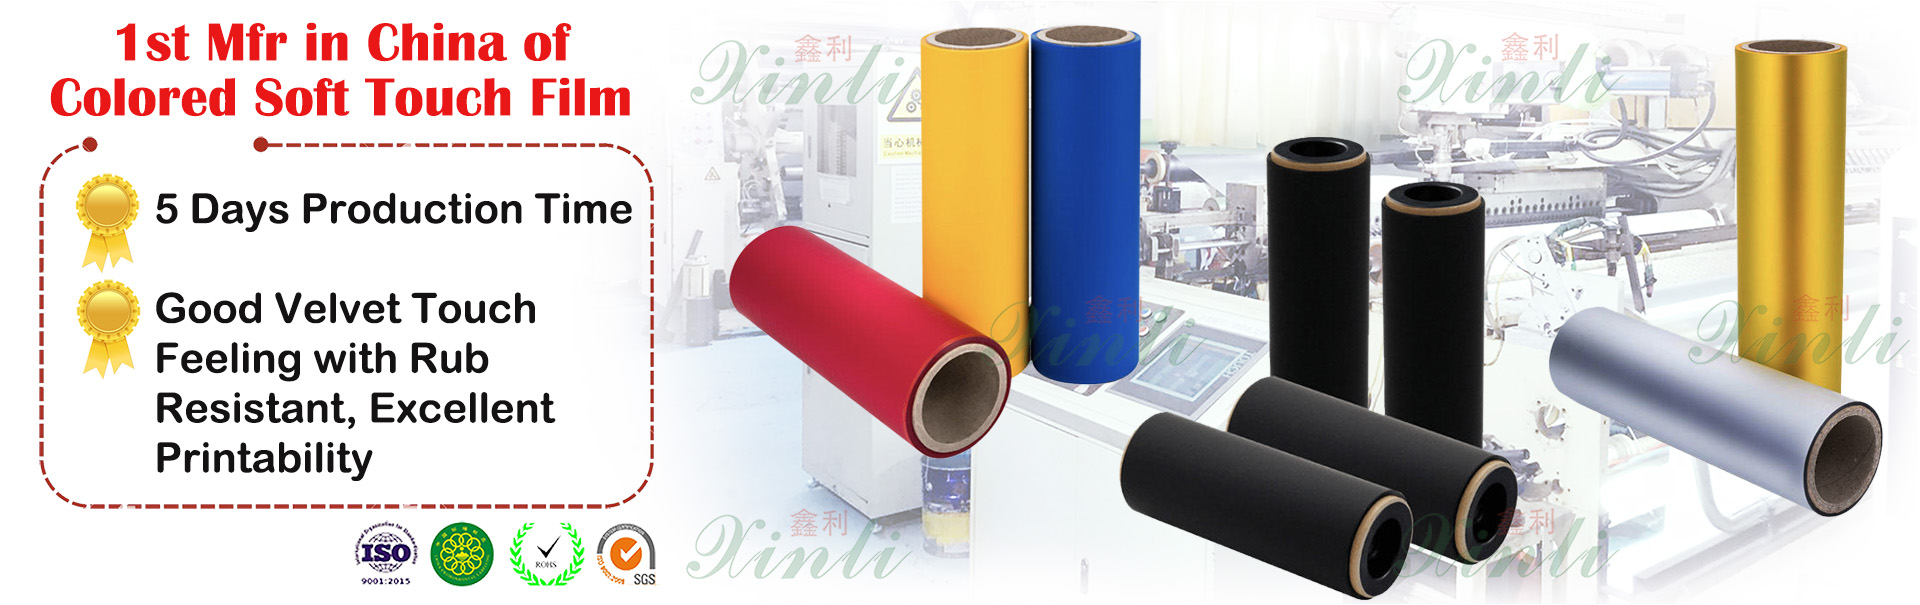 Colored soft touch thermal film